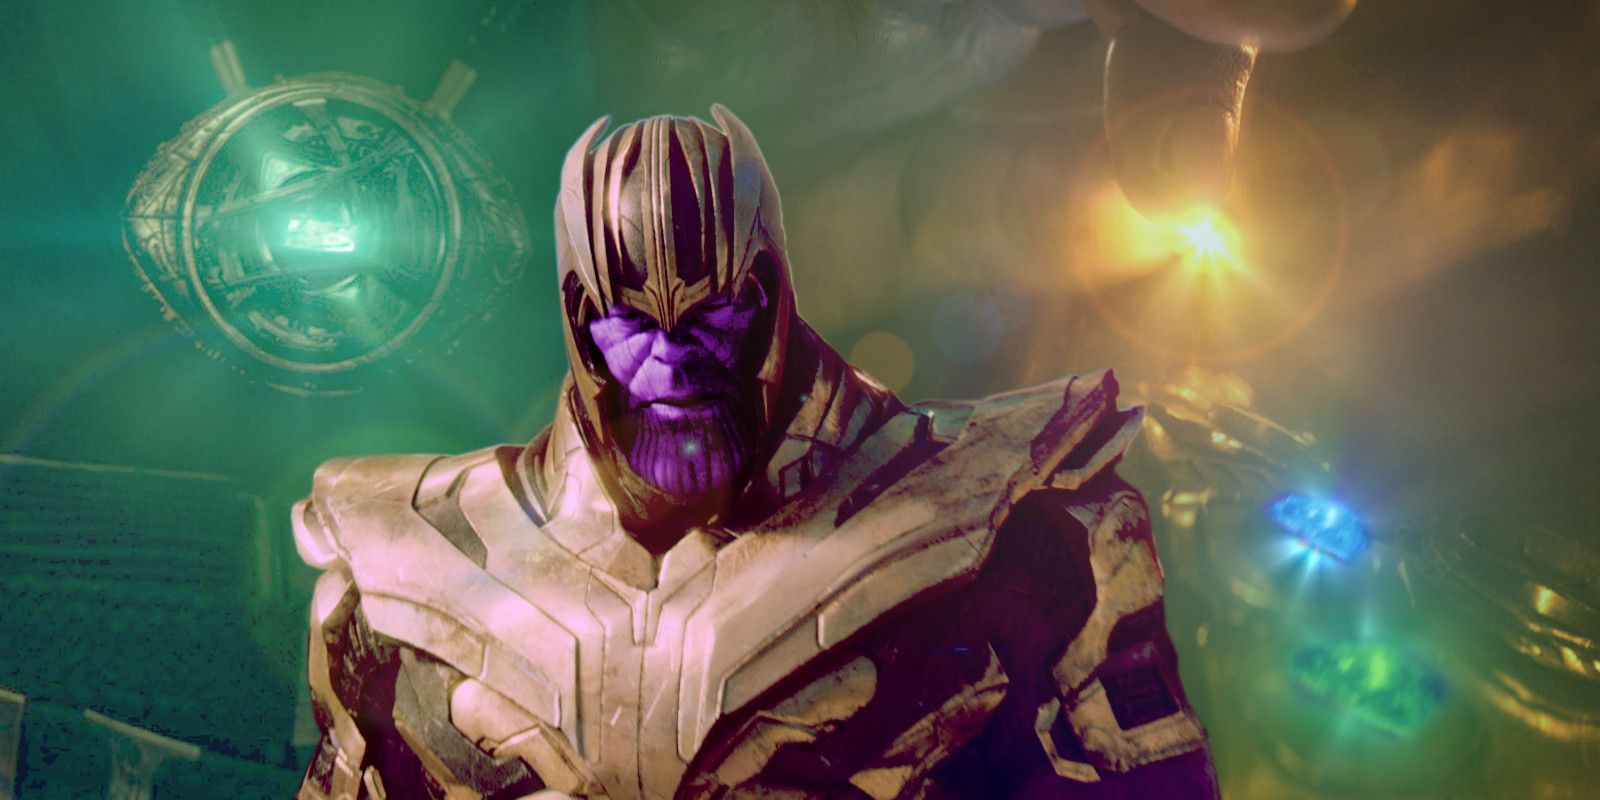 Avengers Theory: Thanos Needs Time Travel To Find The Soul Stone